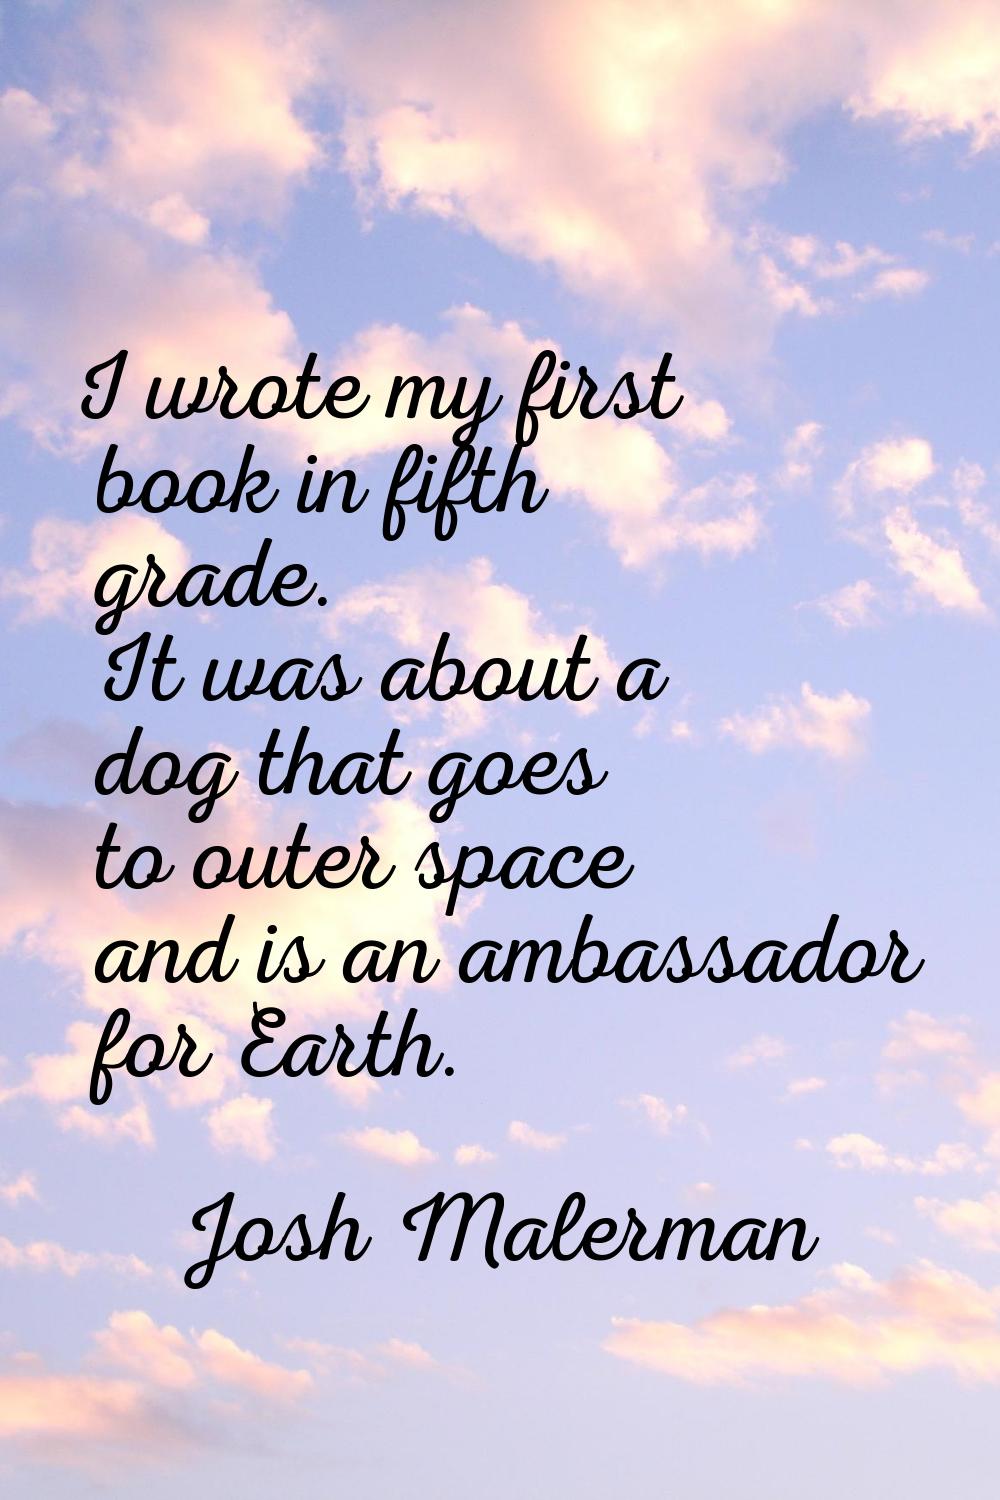 I wrote my first book in fifth grade. It was about a dog that goes to outer space and is an ambassa